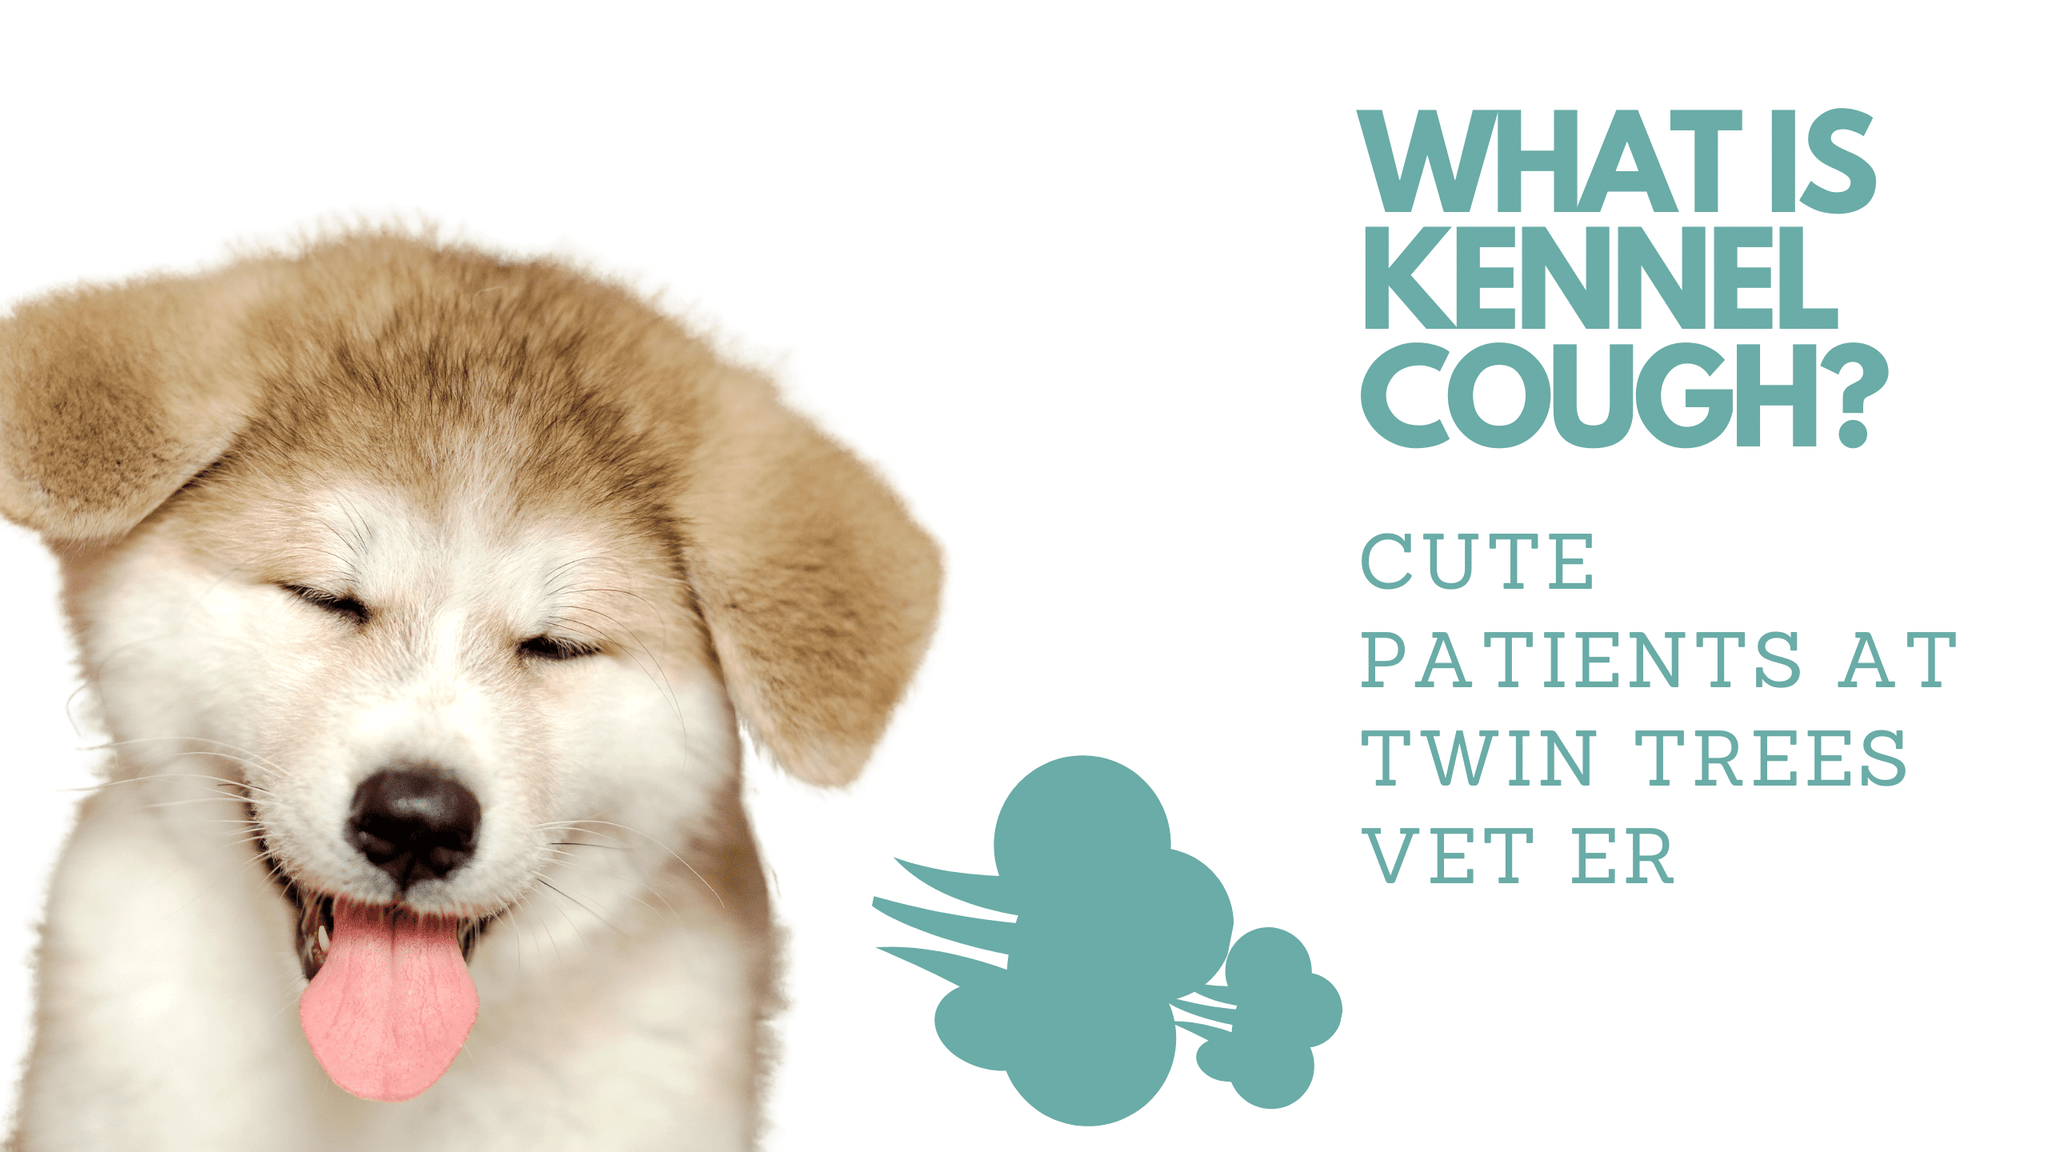 What is Kennel Cough?